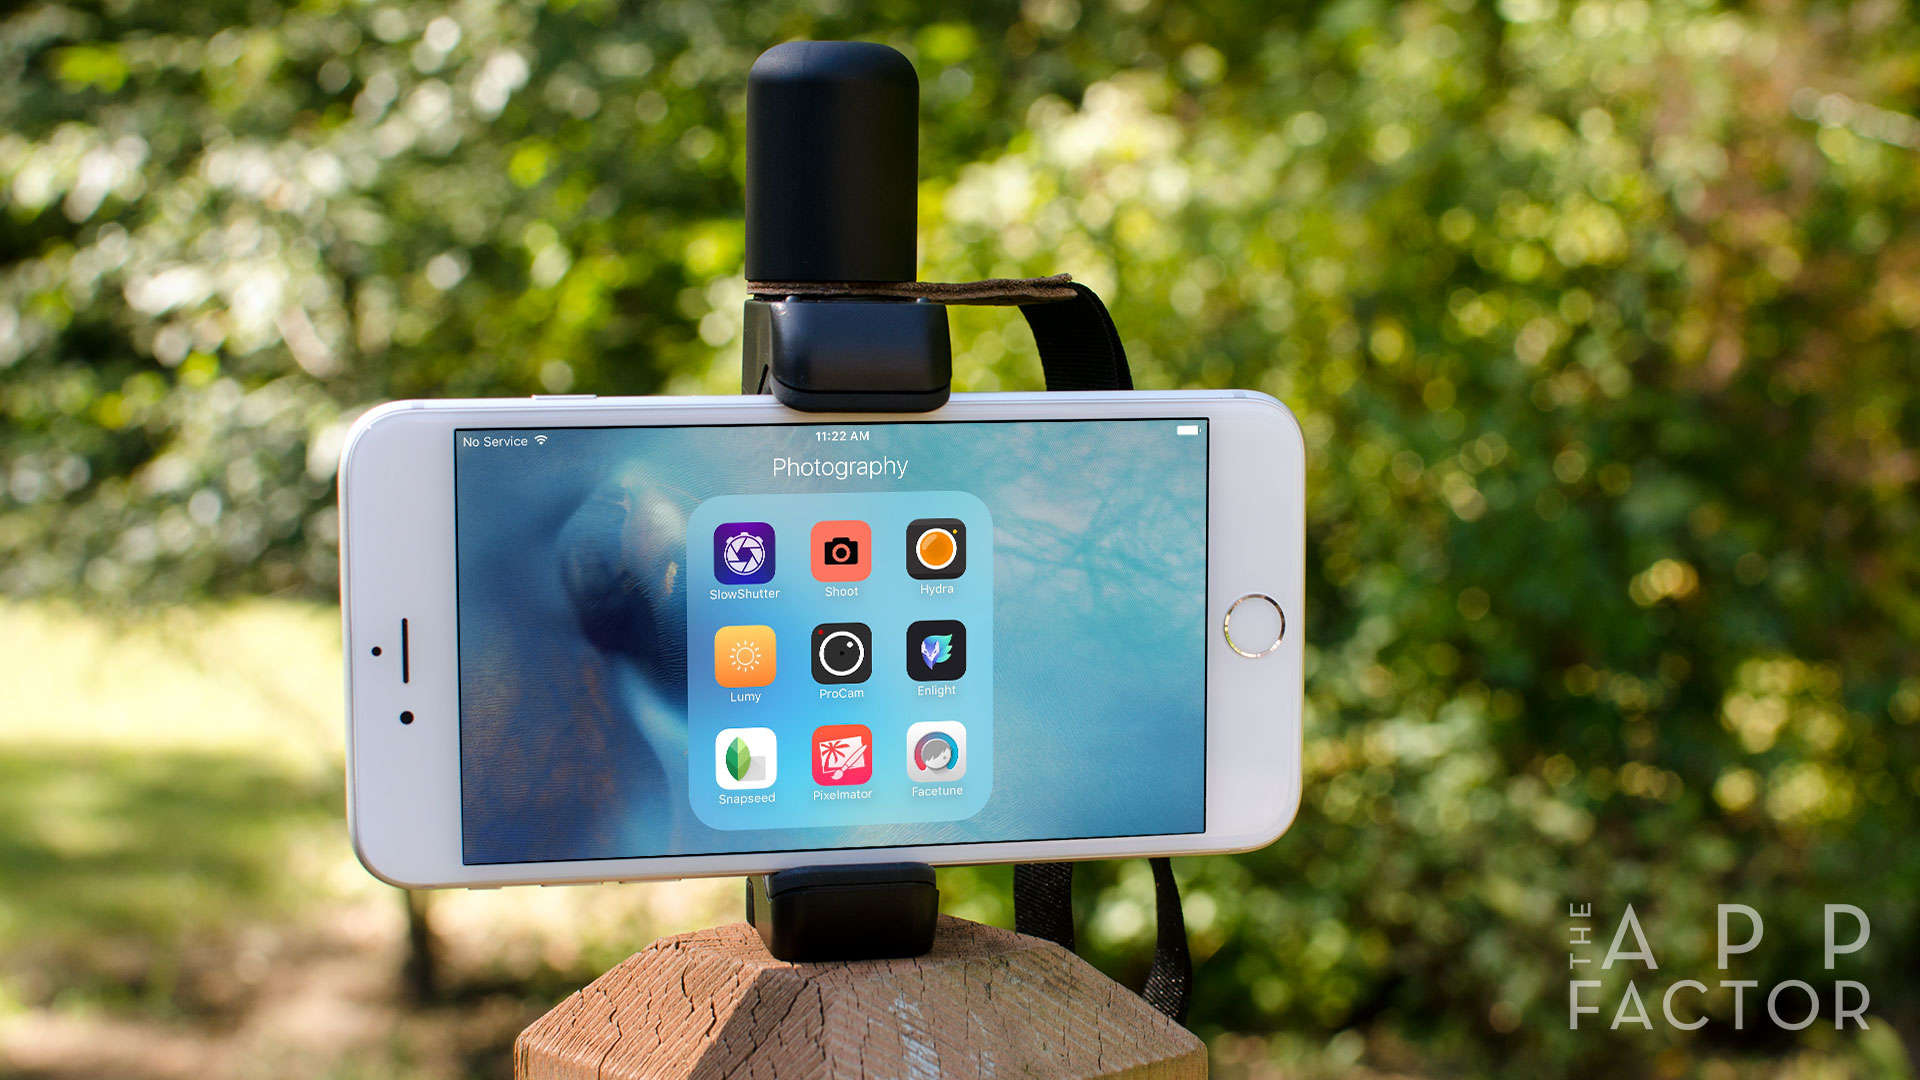 Looking for some great iPhone photography accessories for your gear bag? Here are the best tripods and mounts!